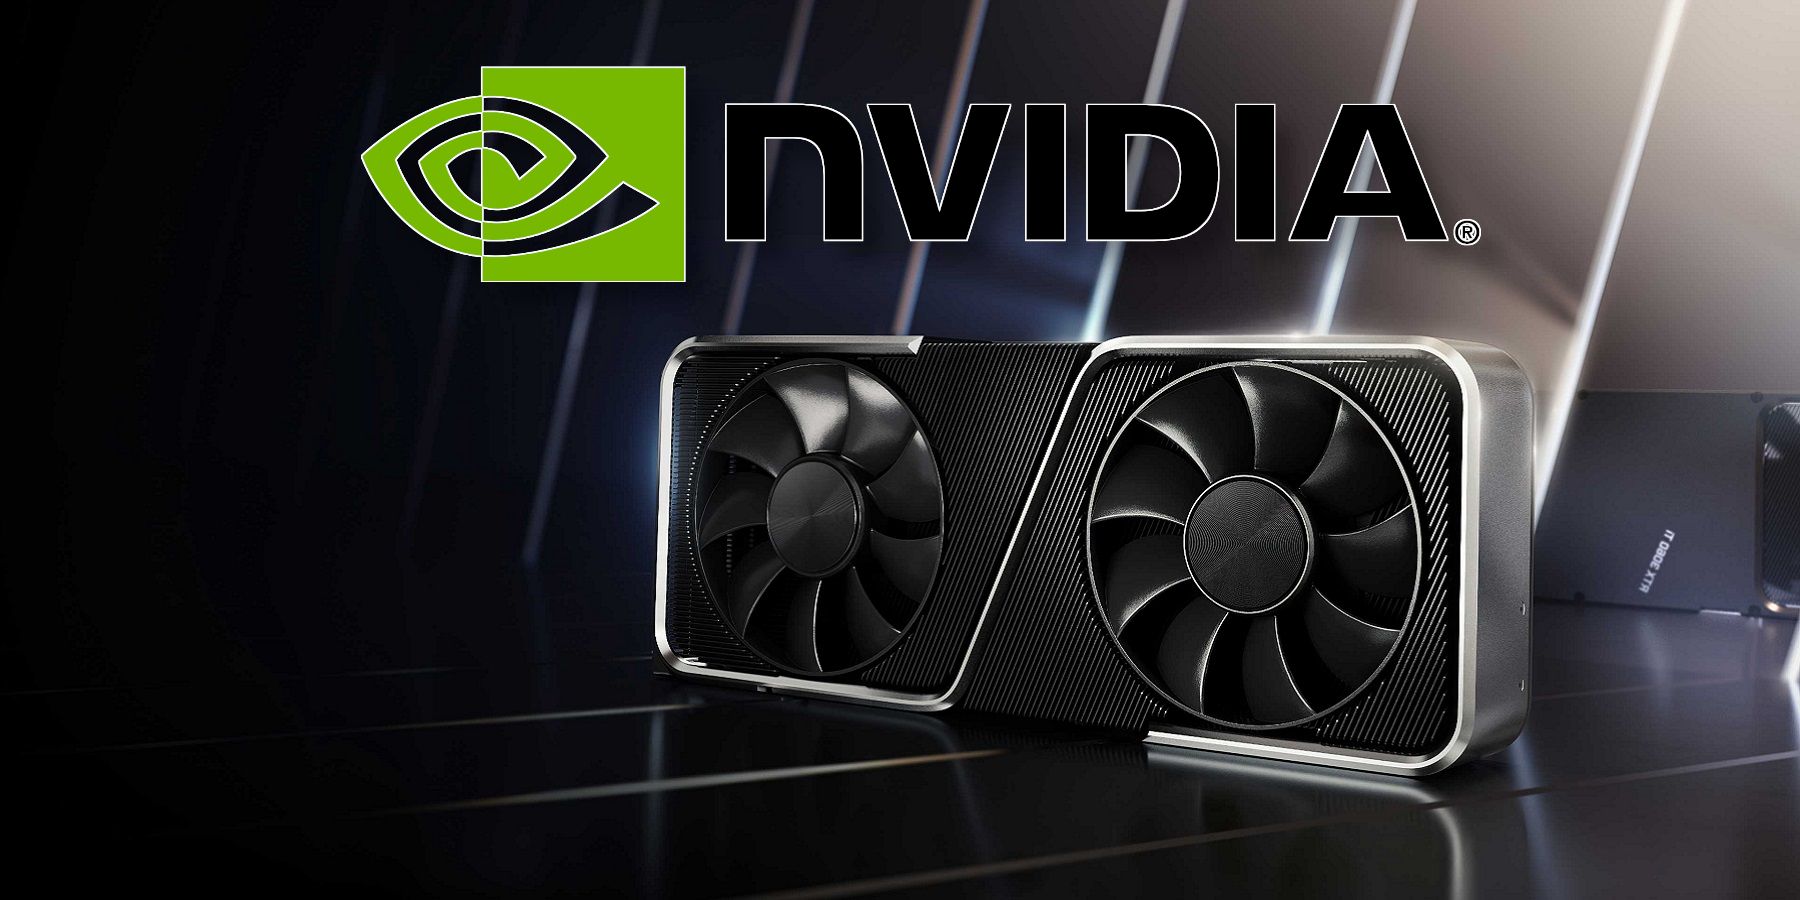 The Nvidia logo with an RTX graphics card underneath it.